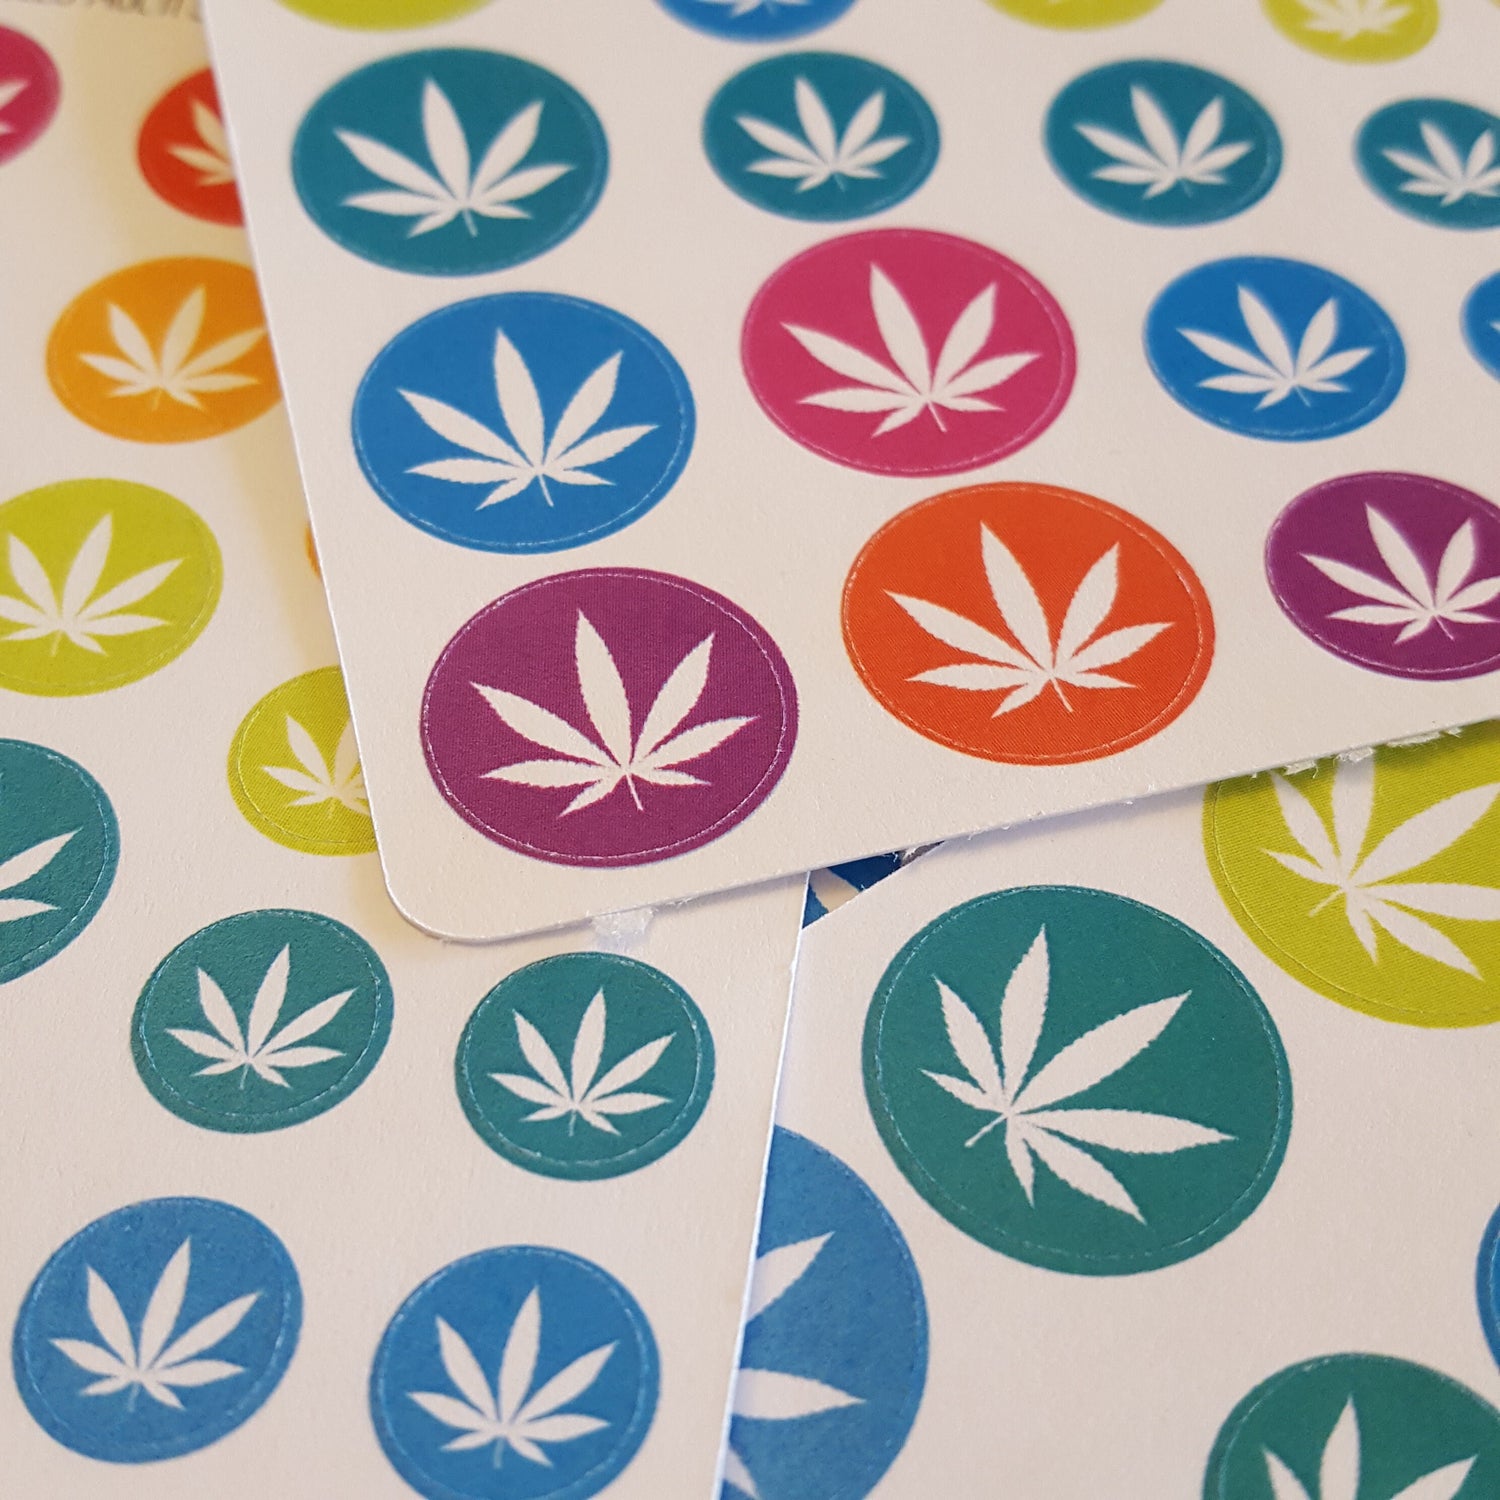 Pot Leaf Circle Stickers Style 1 *Retiring Paper Stickers - final stock* | Marijuana Design, 420 Planner, Cannabis Art, Weed Stickers